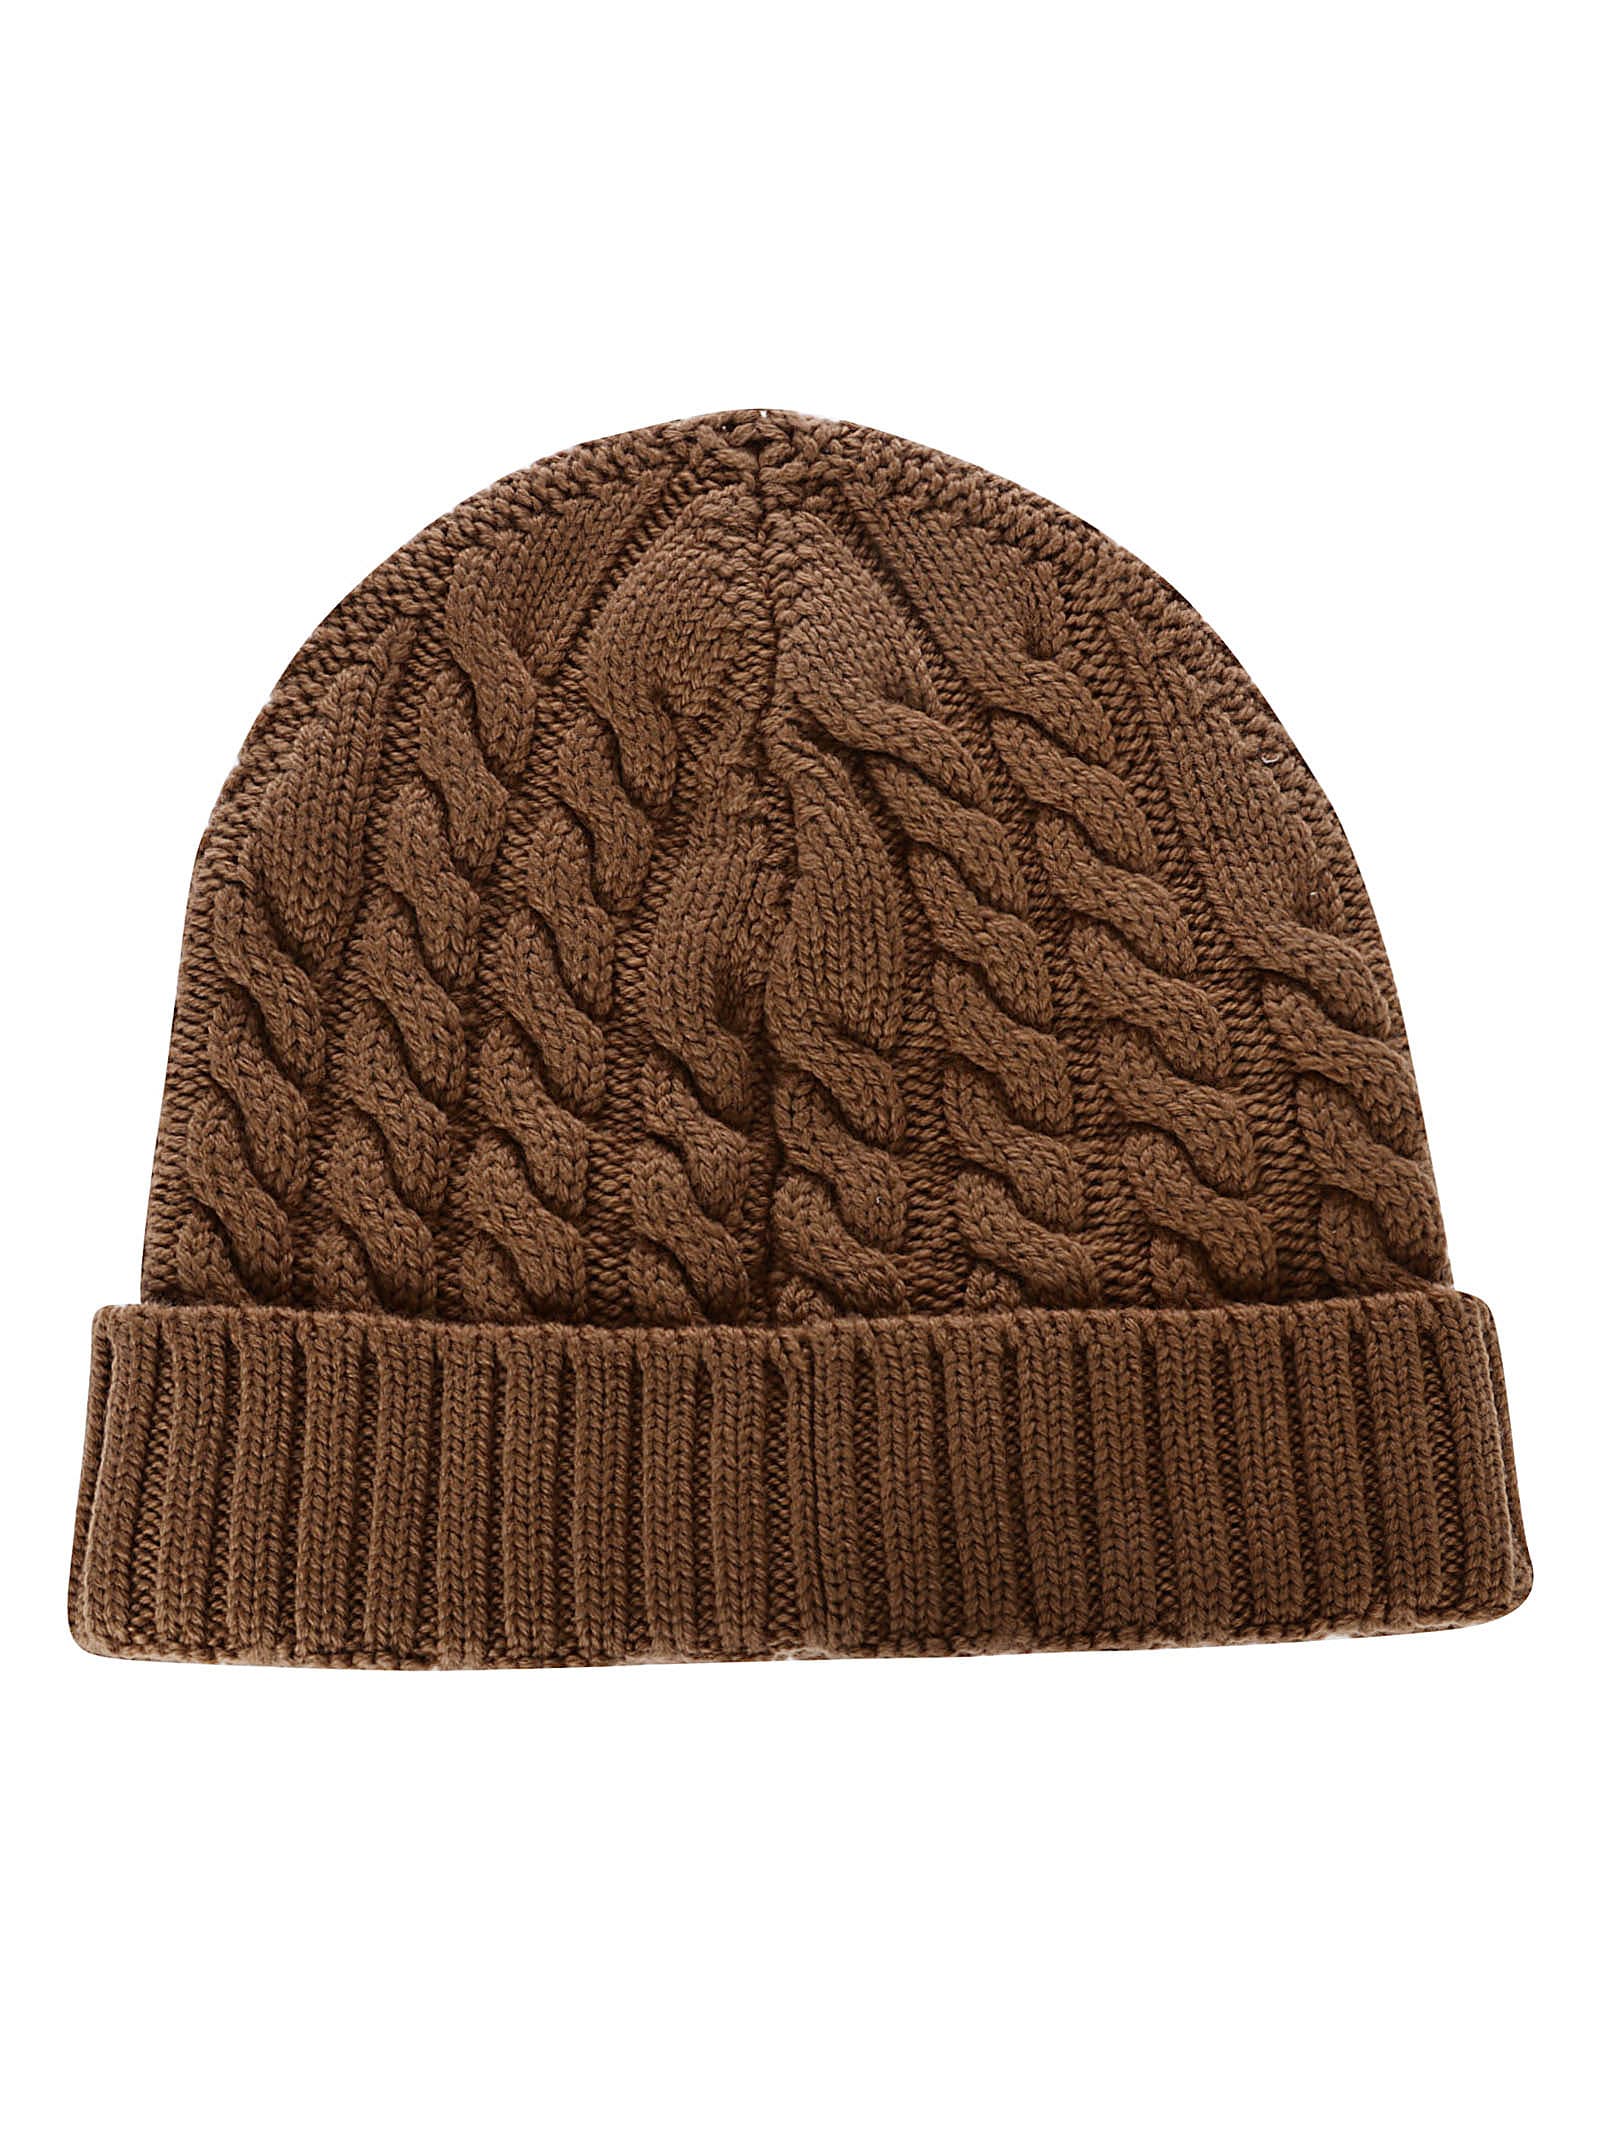 Eleventy Eleventy Cable Knitted Beanie - Brown - 11069118 | italist